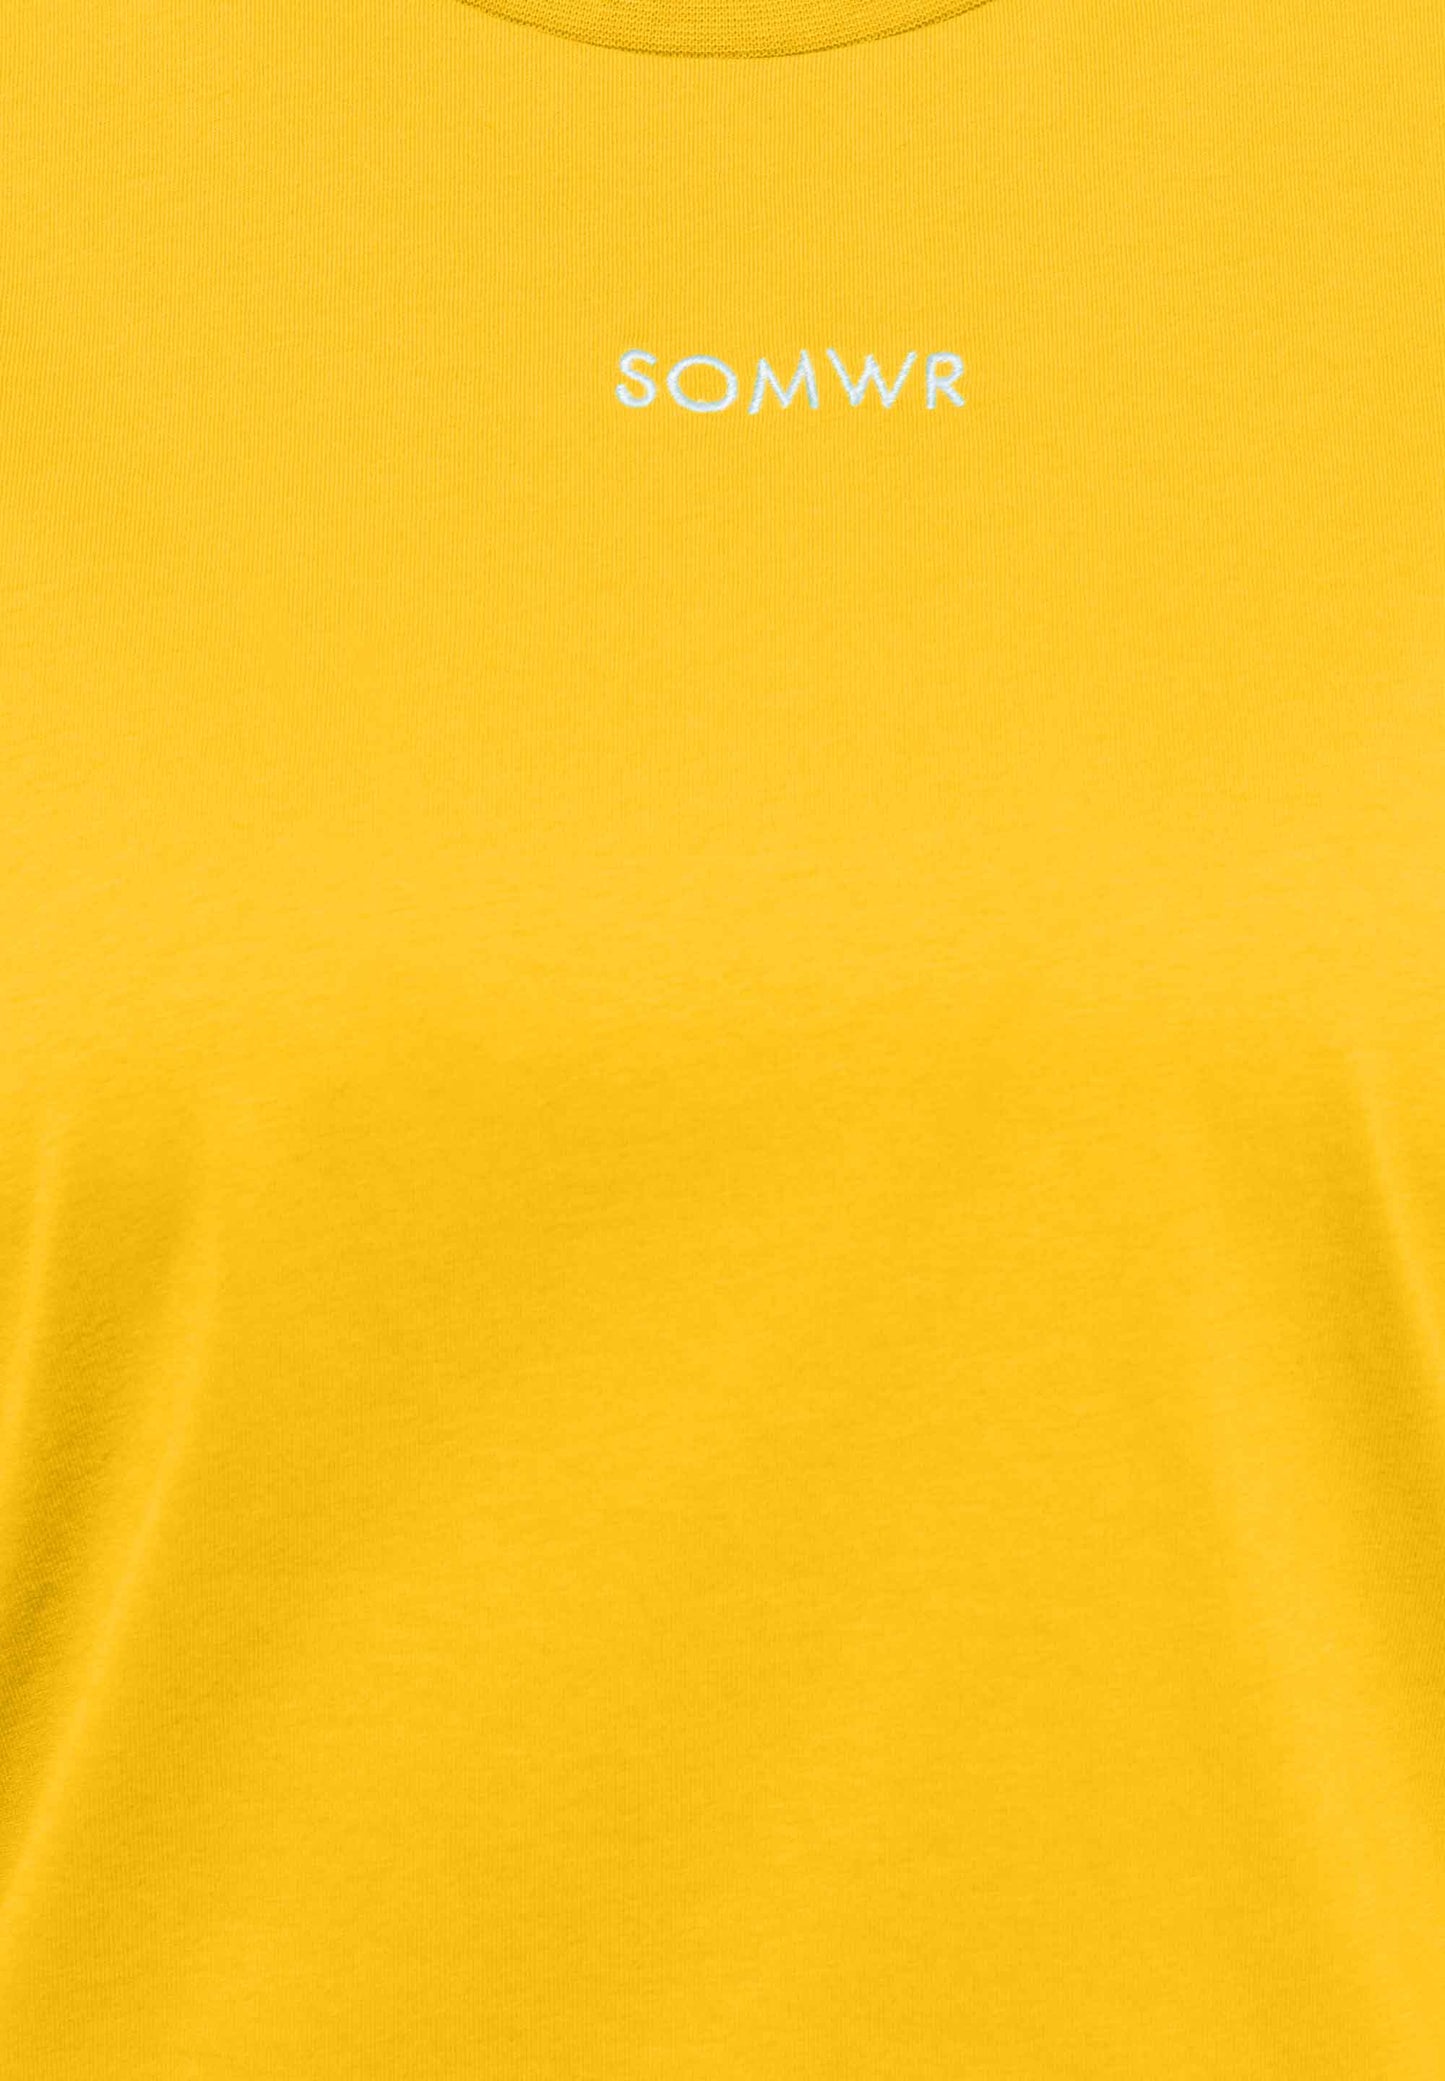 SOMWR PRIMARY T-Shirt YEL008